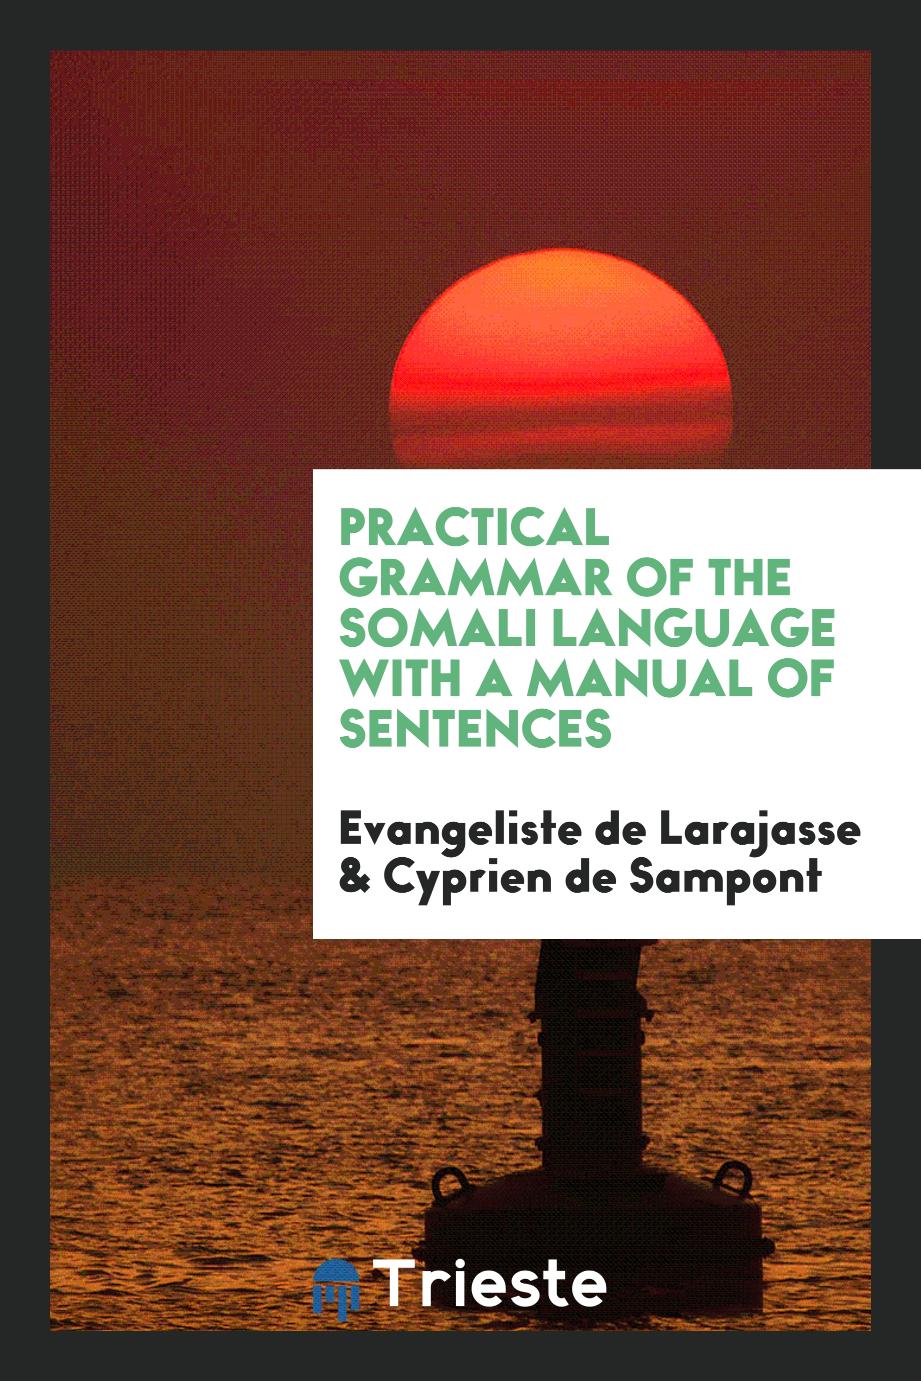 Practical Grammar of the Somali Language with a Manual of Sentences